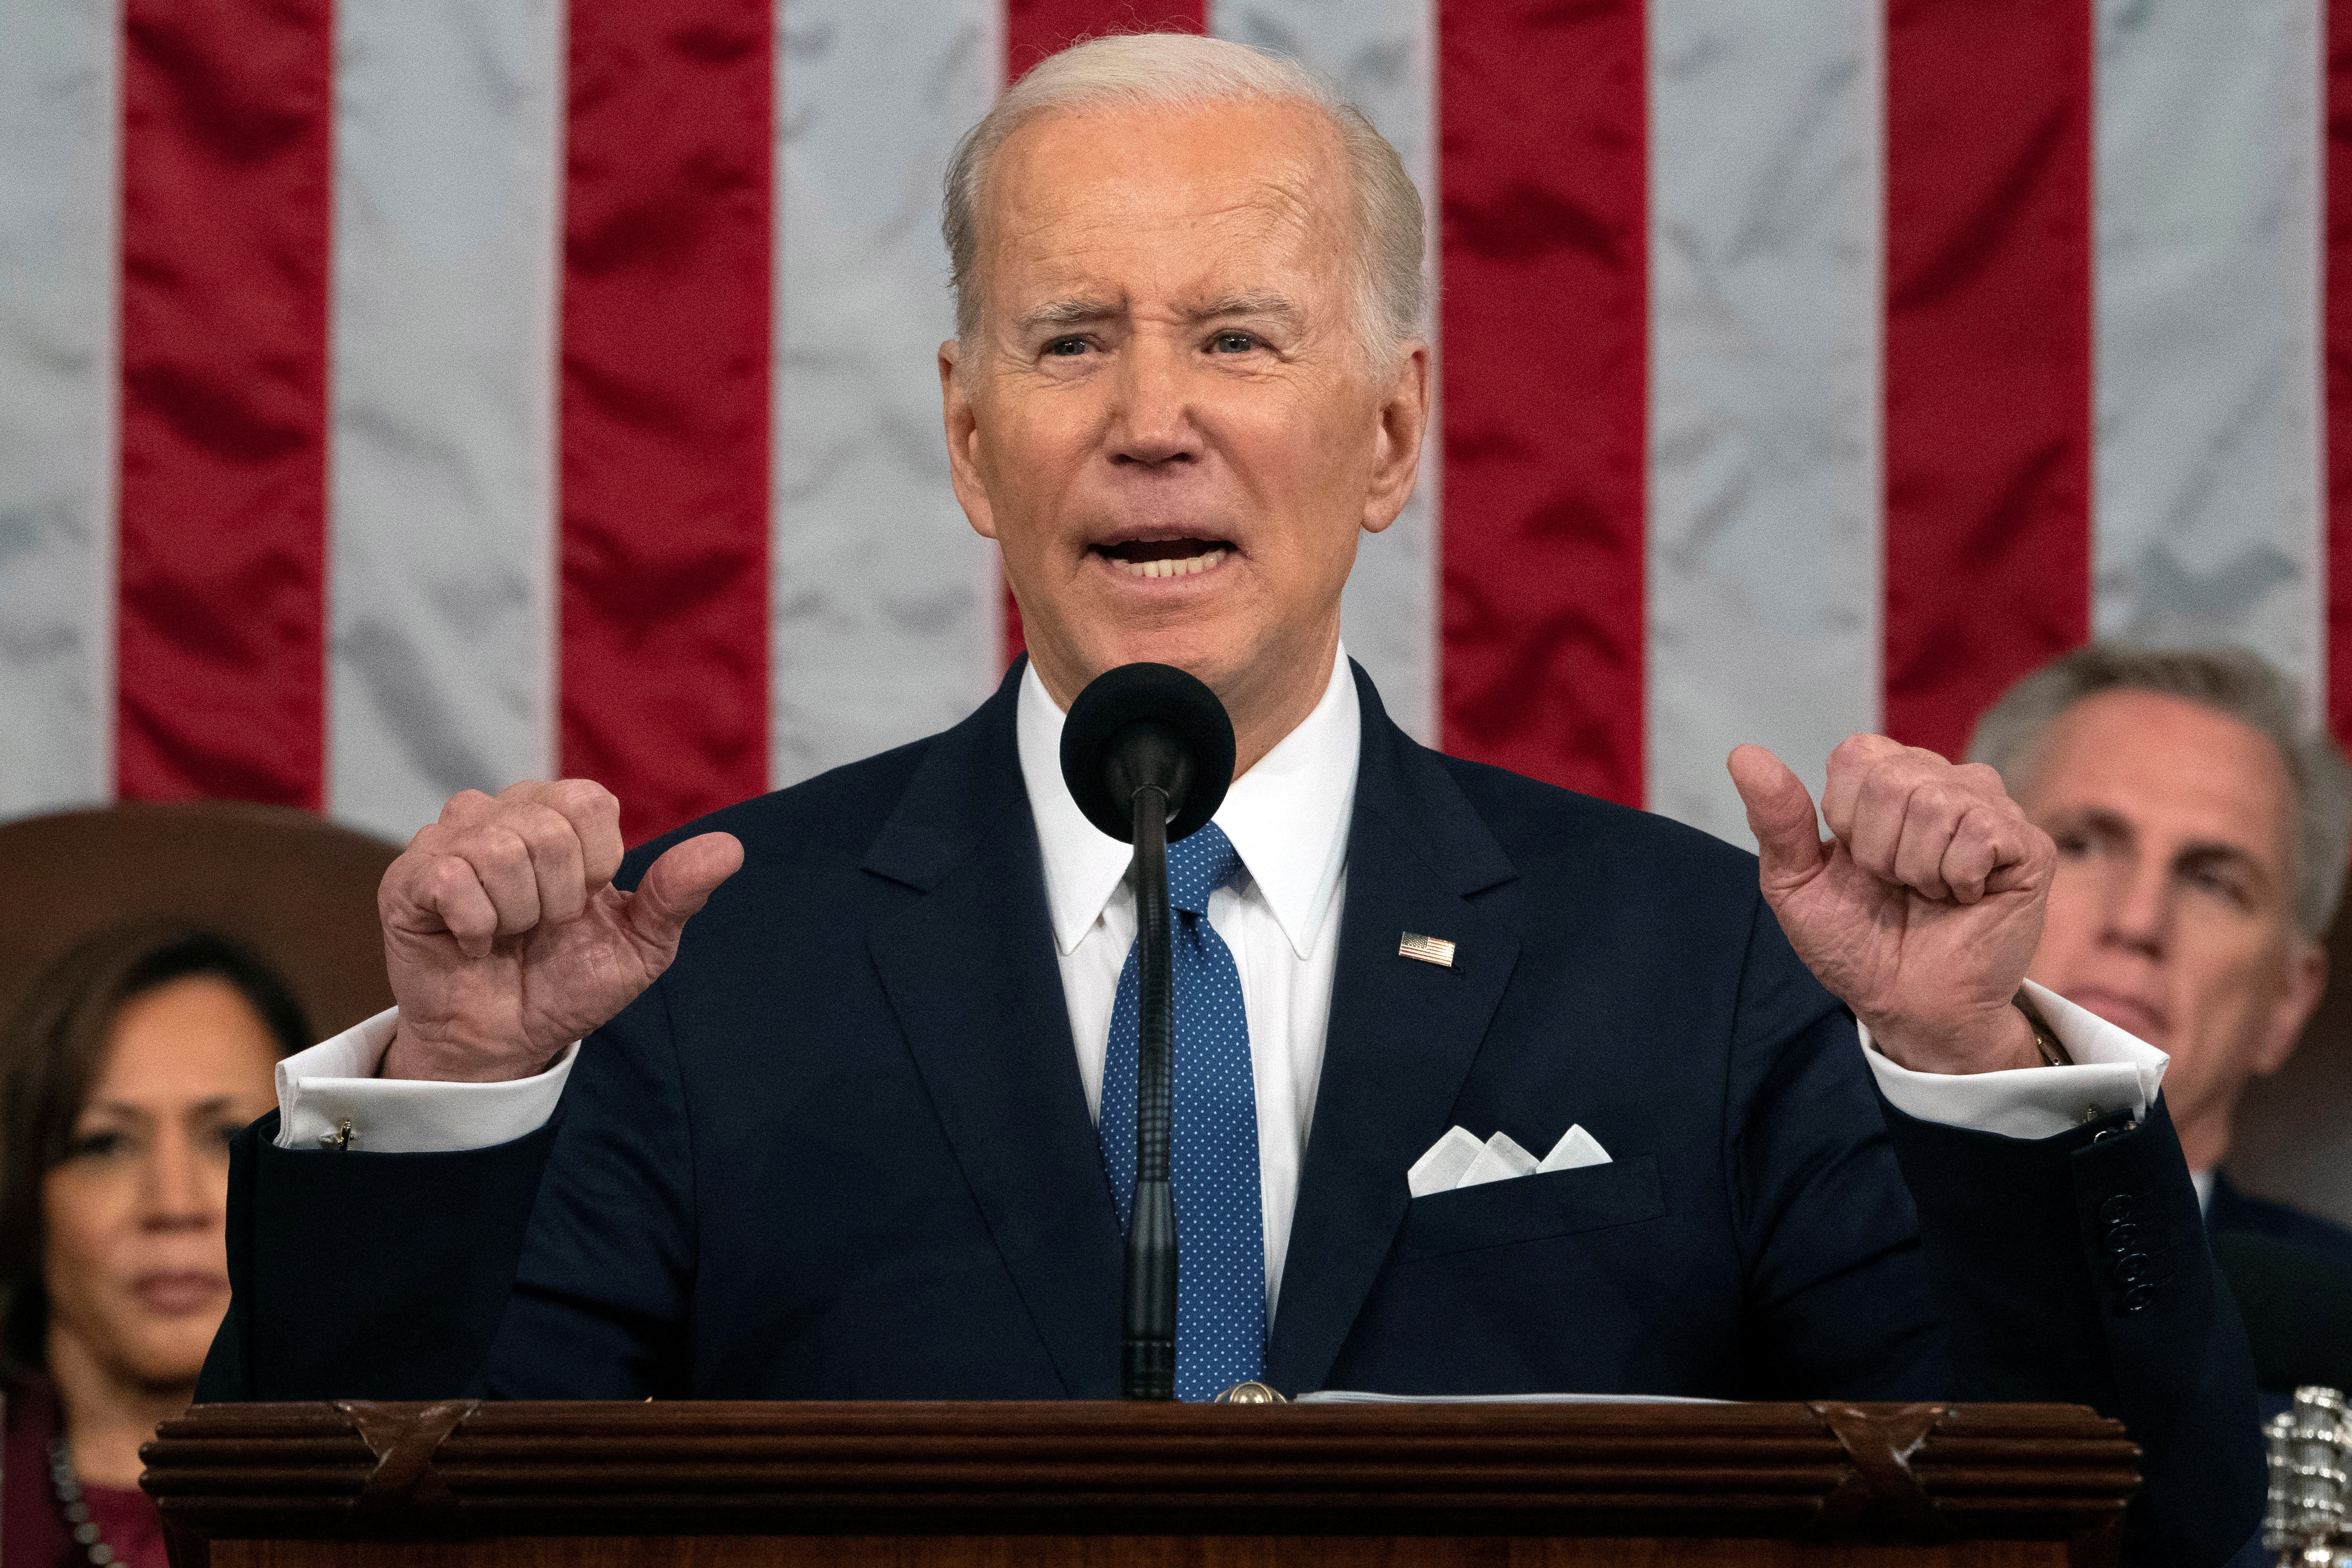 President Joe Biden delivers the State of the Union address to a joint session of Congress at the U.S. Capitol, Tuesday, Feb. 7, 2023, in Washington, as Vice President Kamala Harris and House Speaker Kevin McCarthy of Calif., listen.   Jacquelyn Martin/Pool via REUTERS